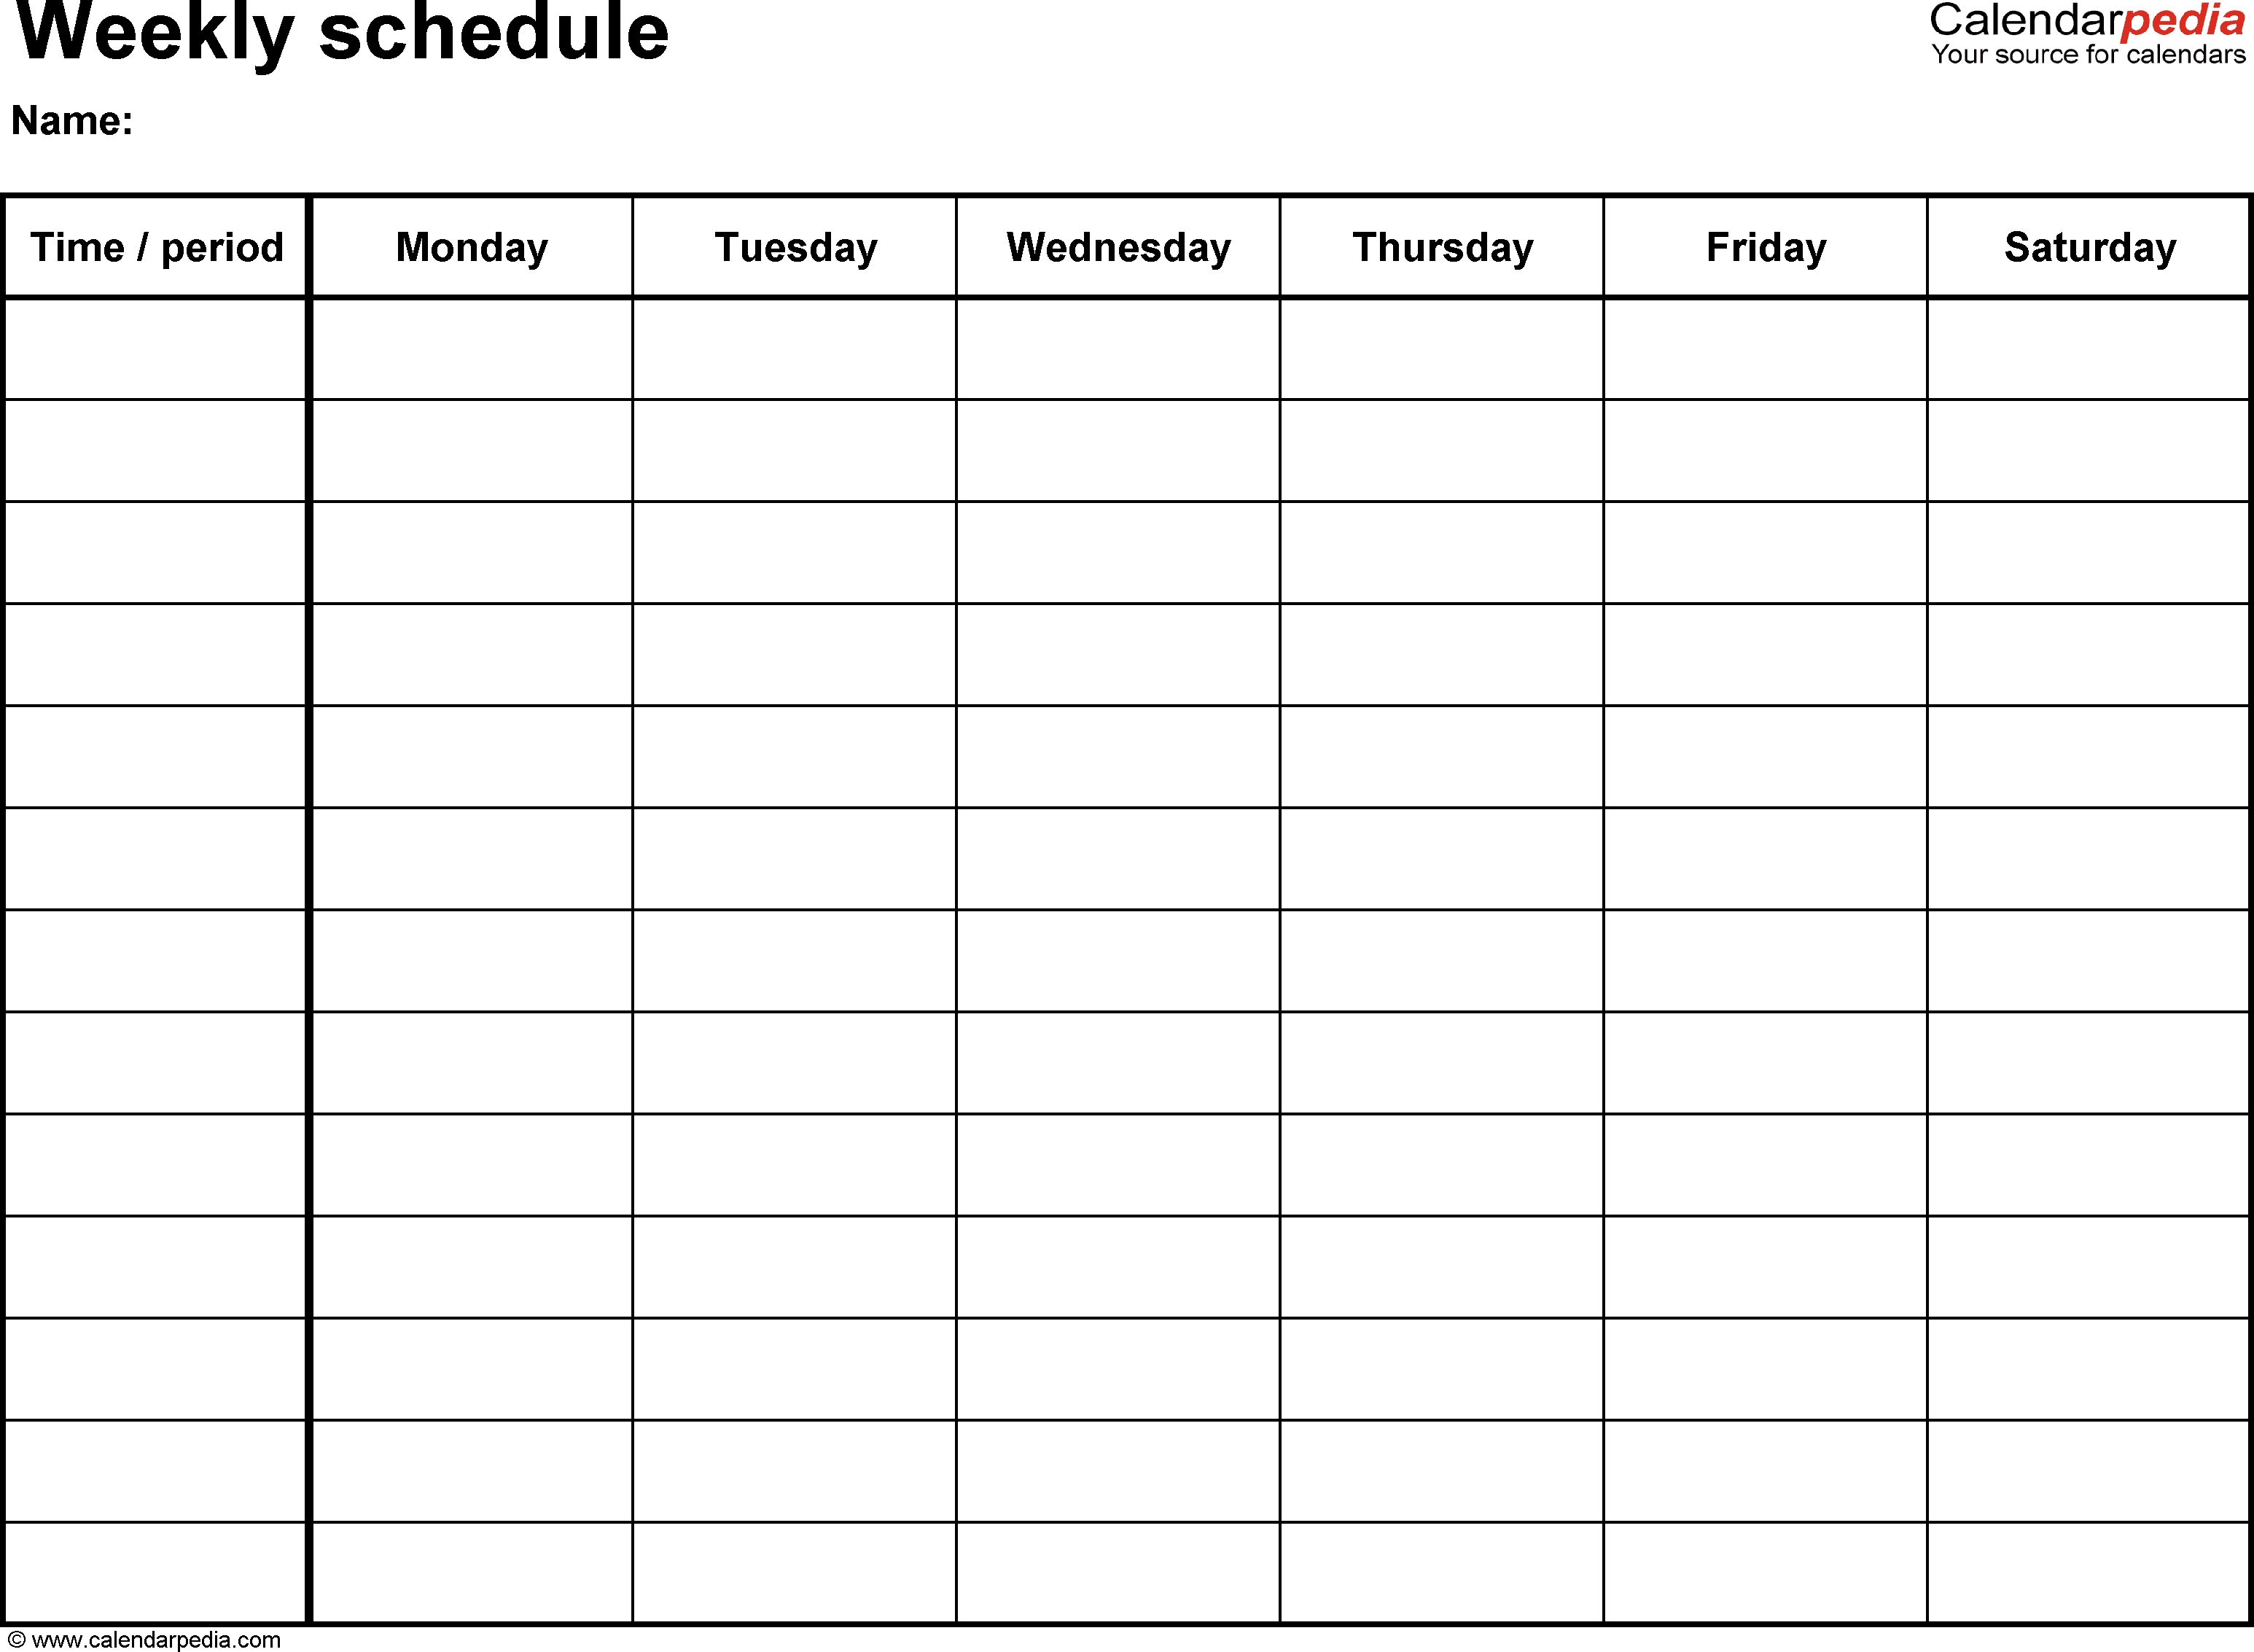 Free Weekly Schedule Templates For Pdf - 18 Templates intended for Printable Weekly Planner With Times